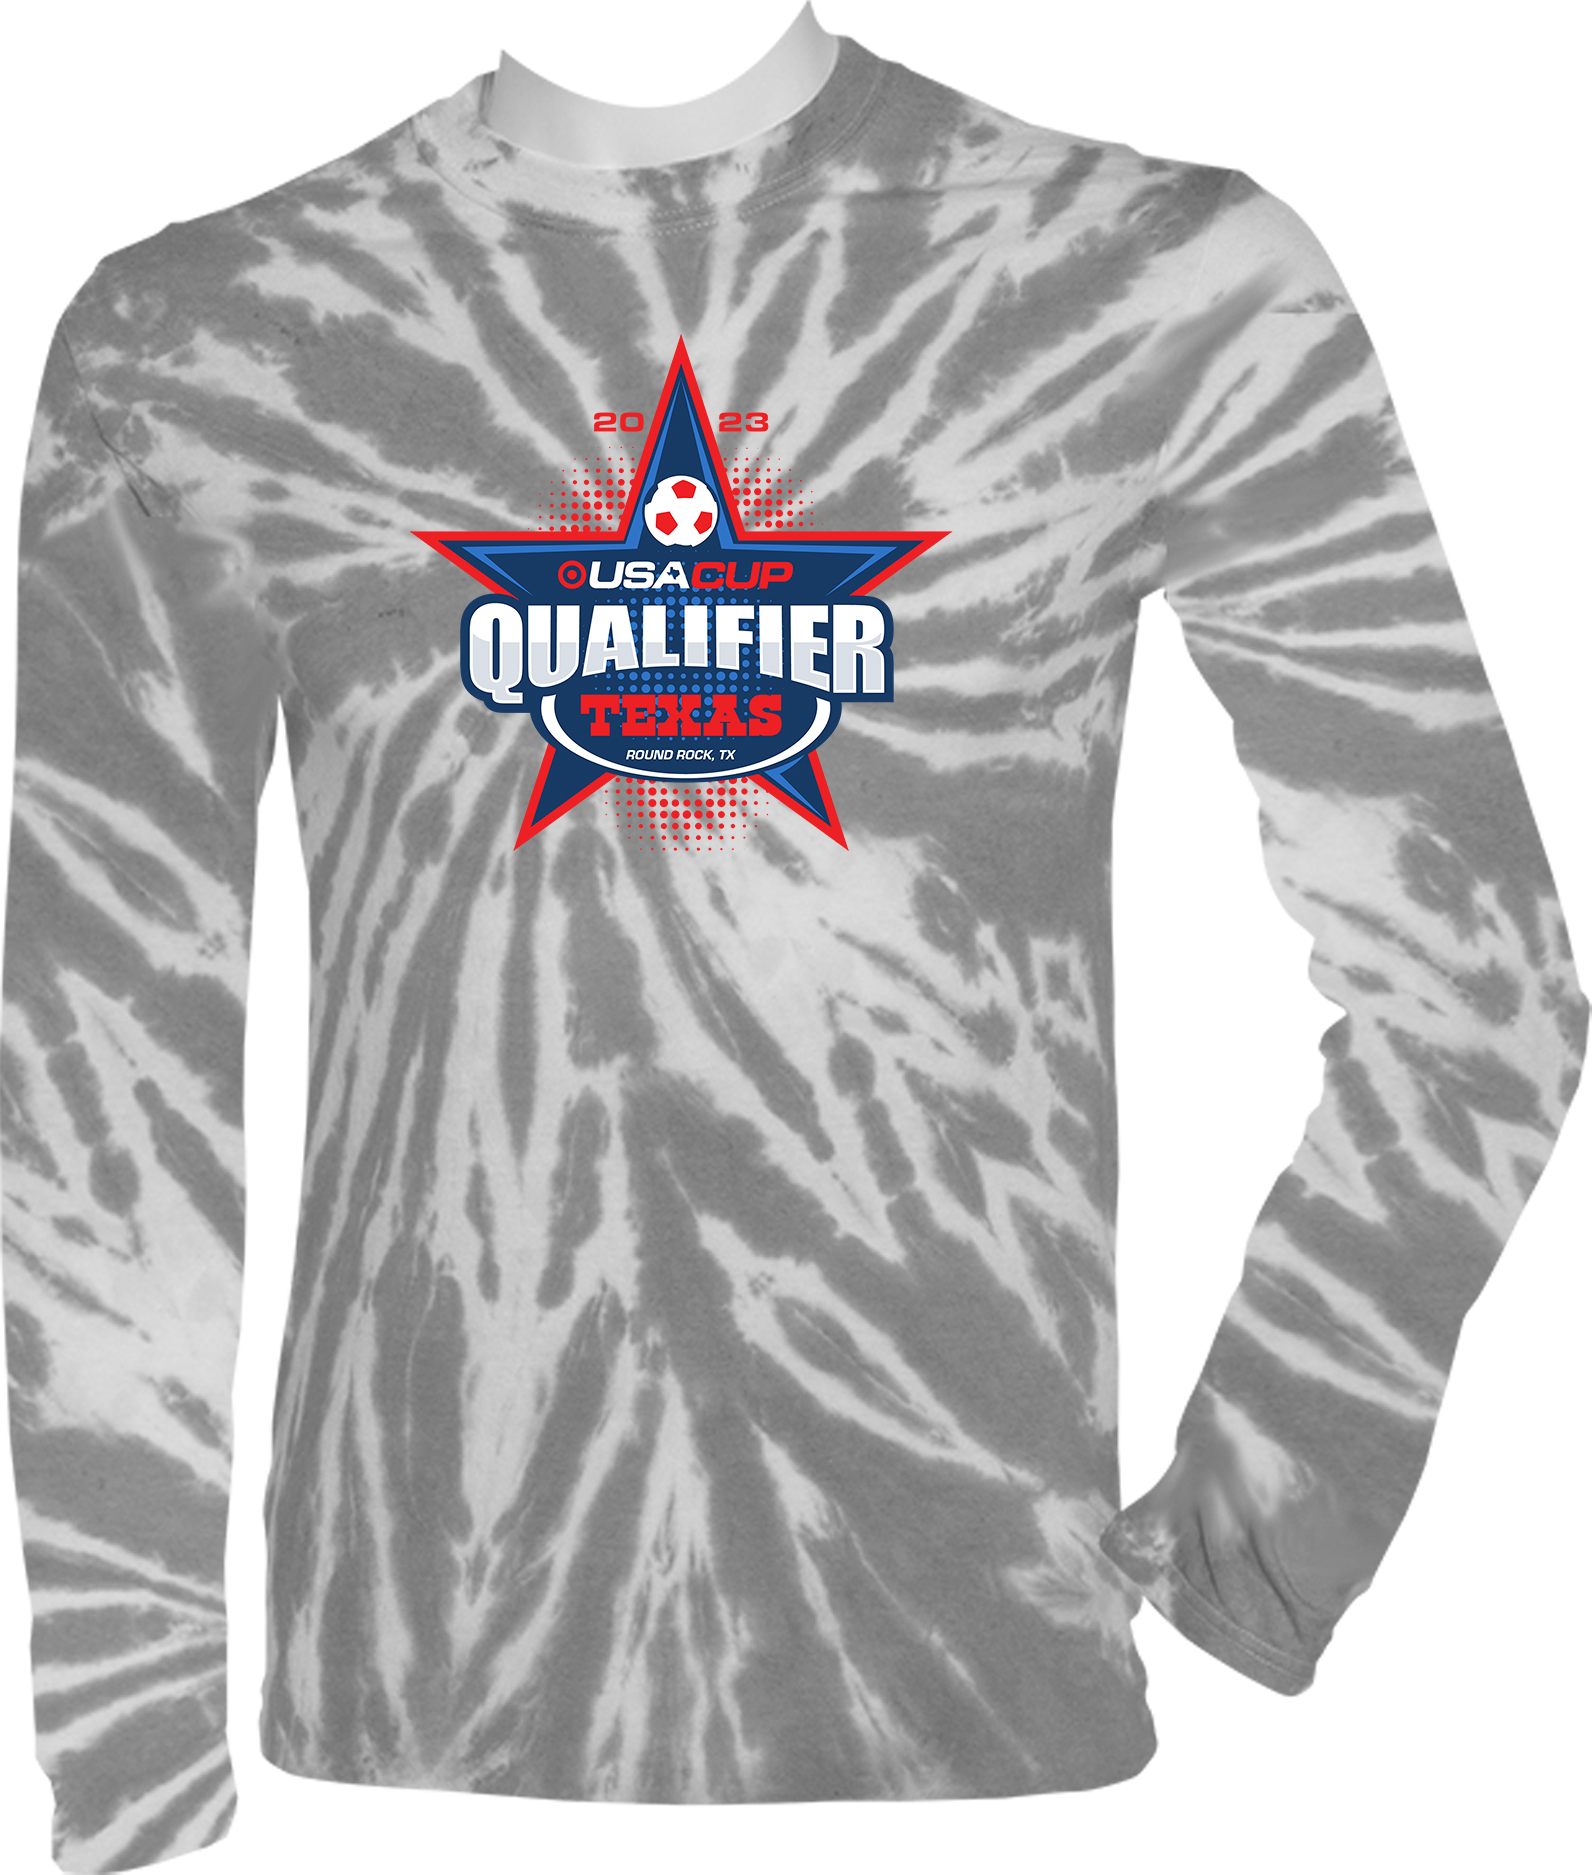 TIE-DYE LONG SLEEVES - 2023 USA CUP Qualifier Texas